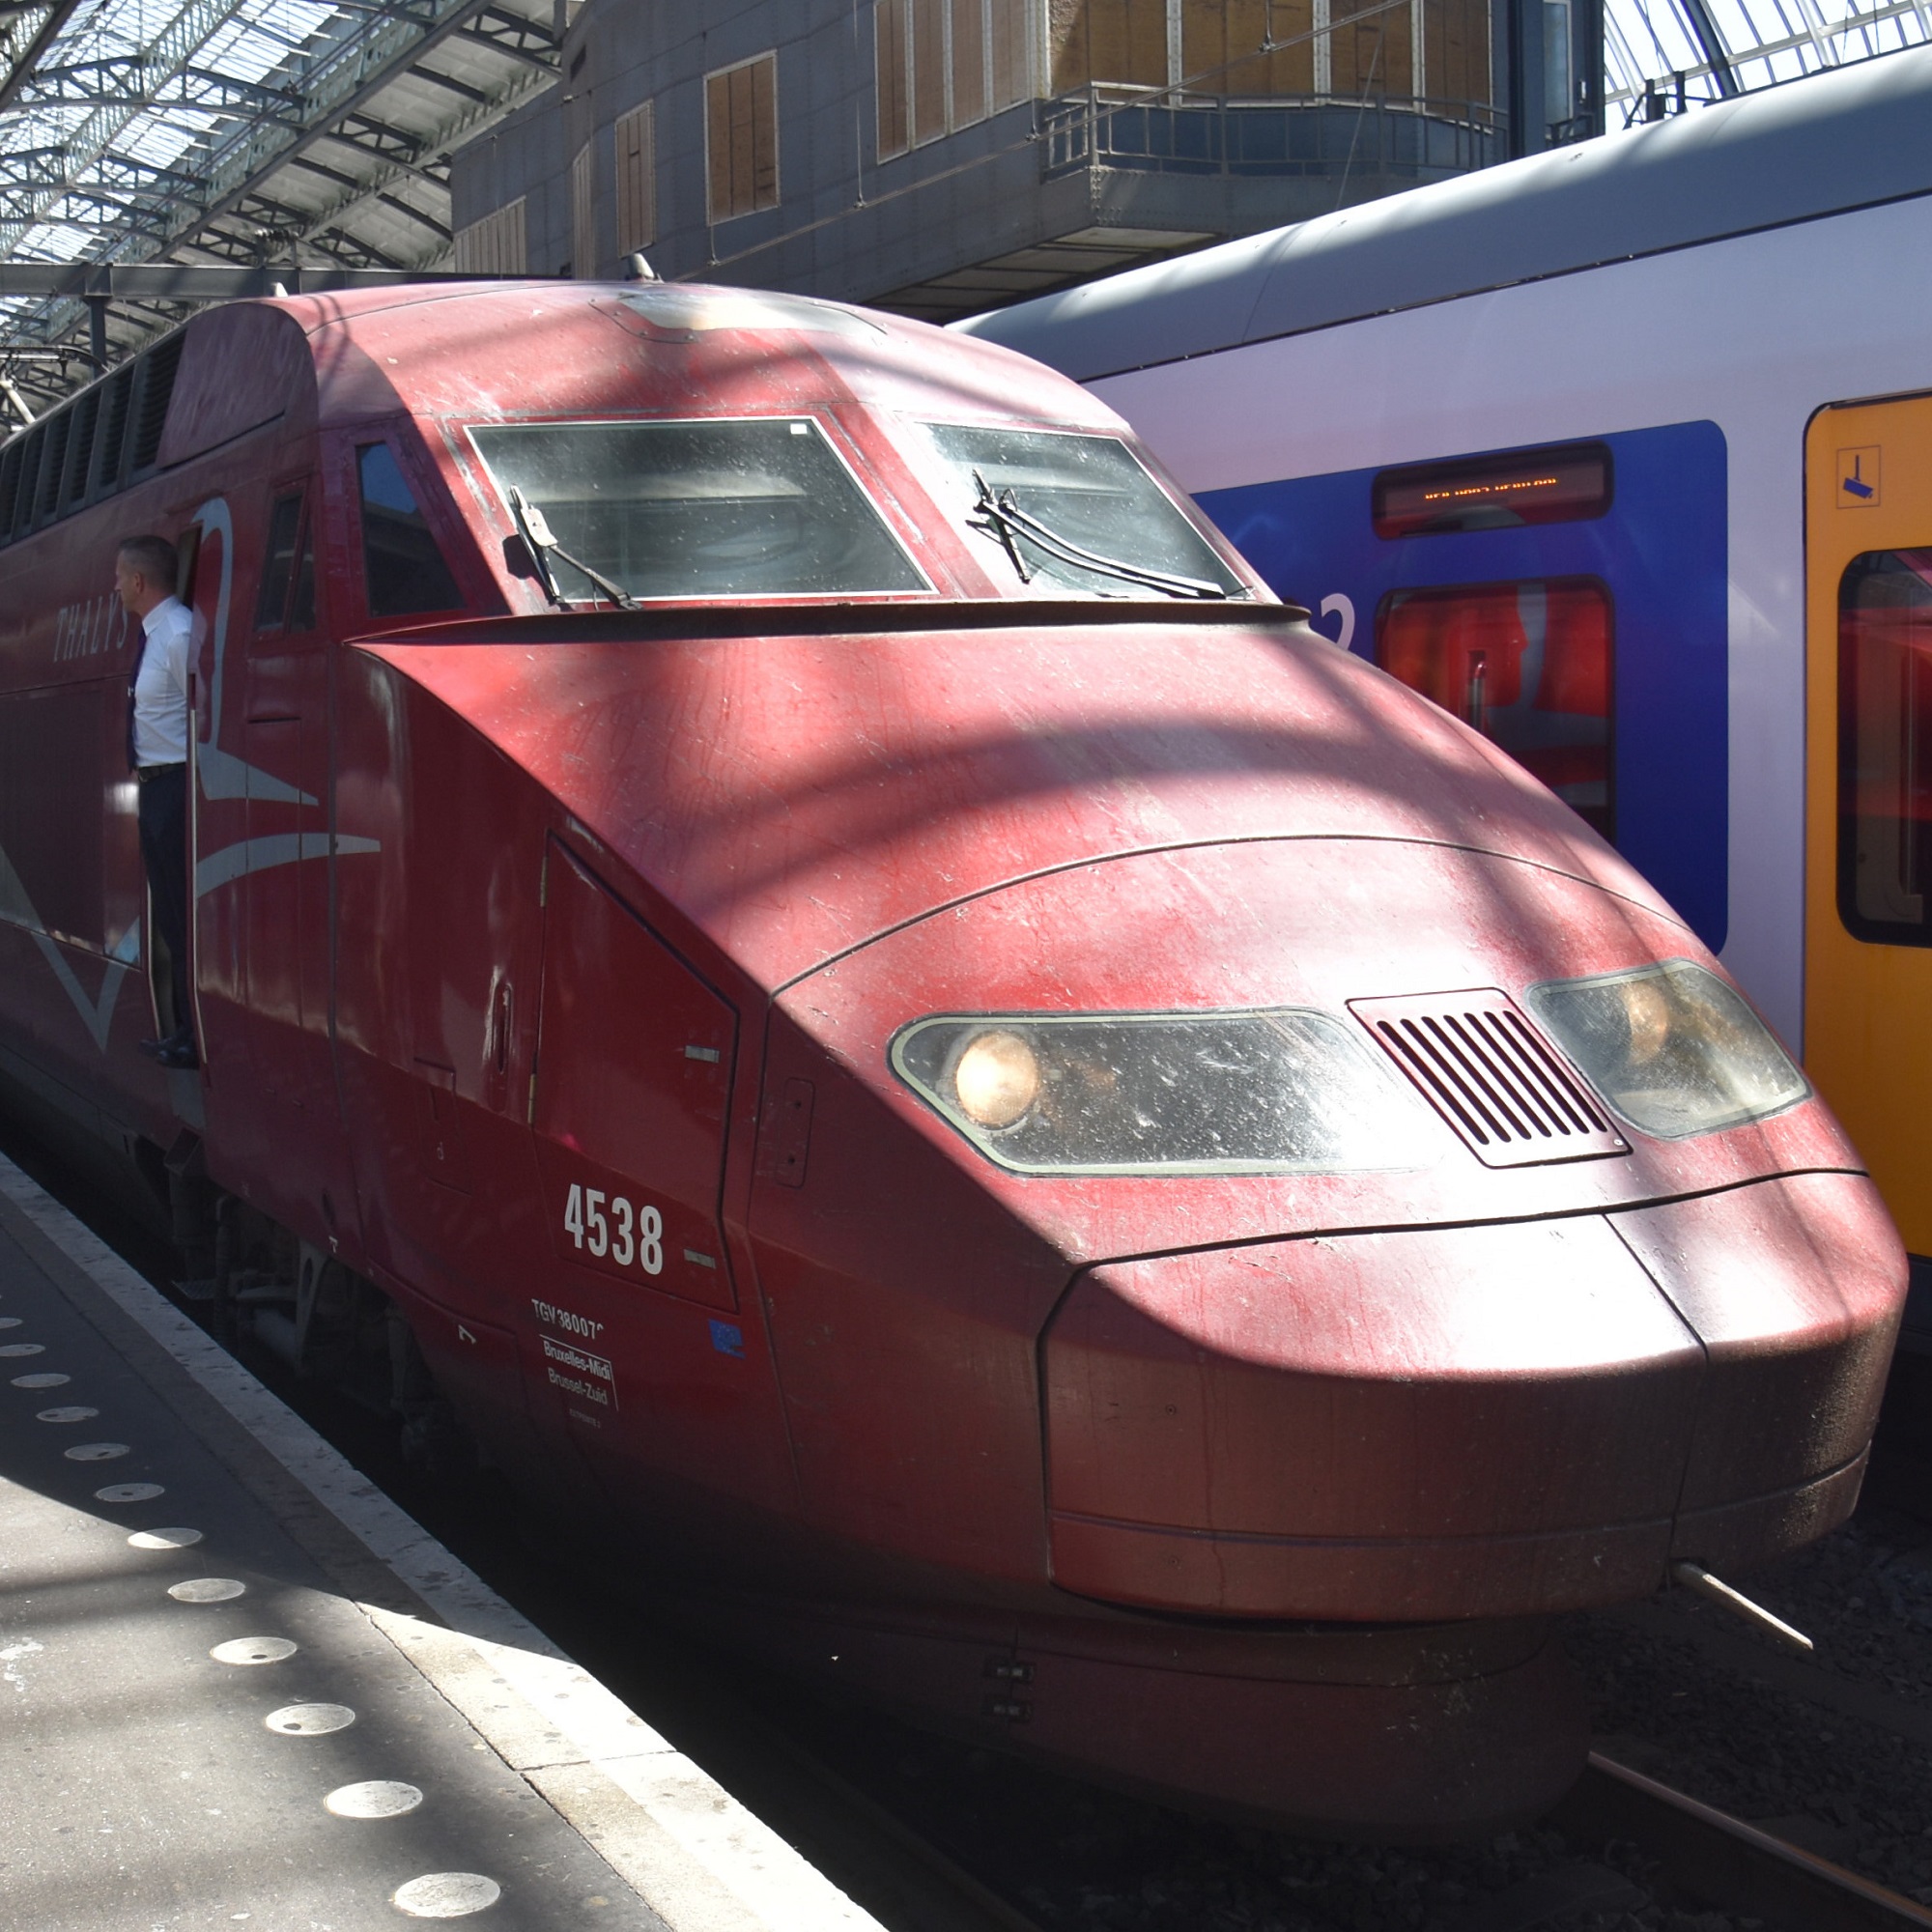 The front power car of a Thalys TGV-R, No 4538, waiting at Amsterdam Centraal before the start of its journey to Lille-Europe in June 2018.